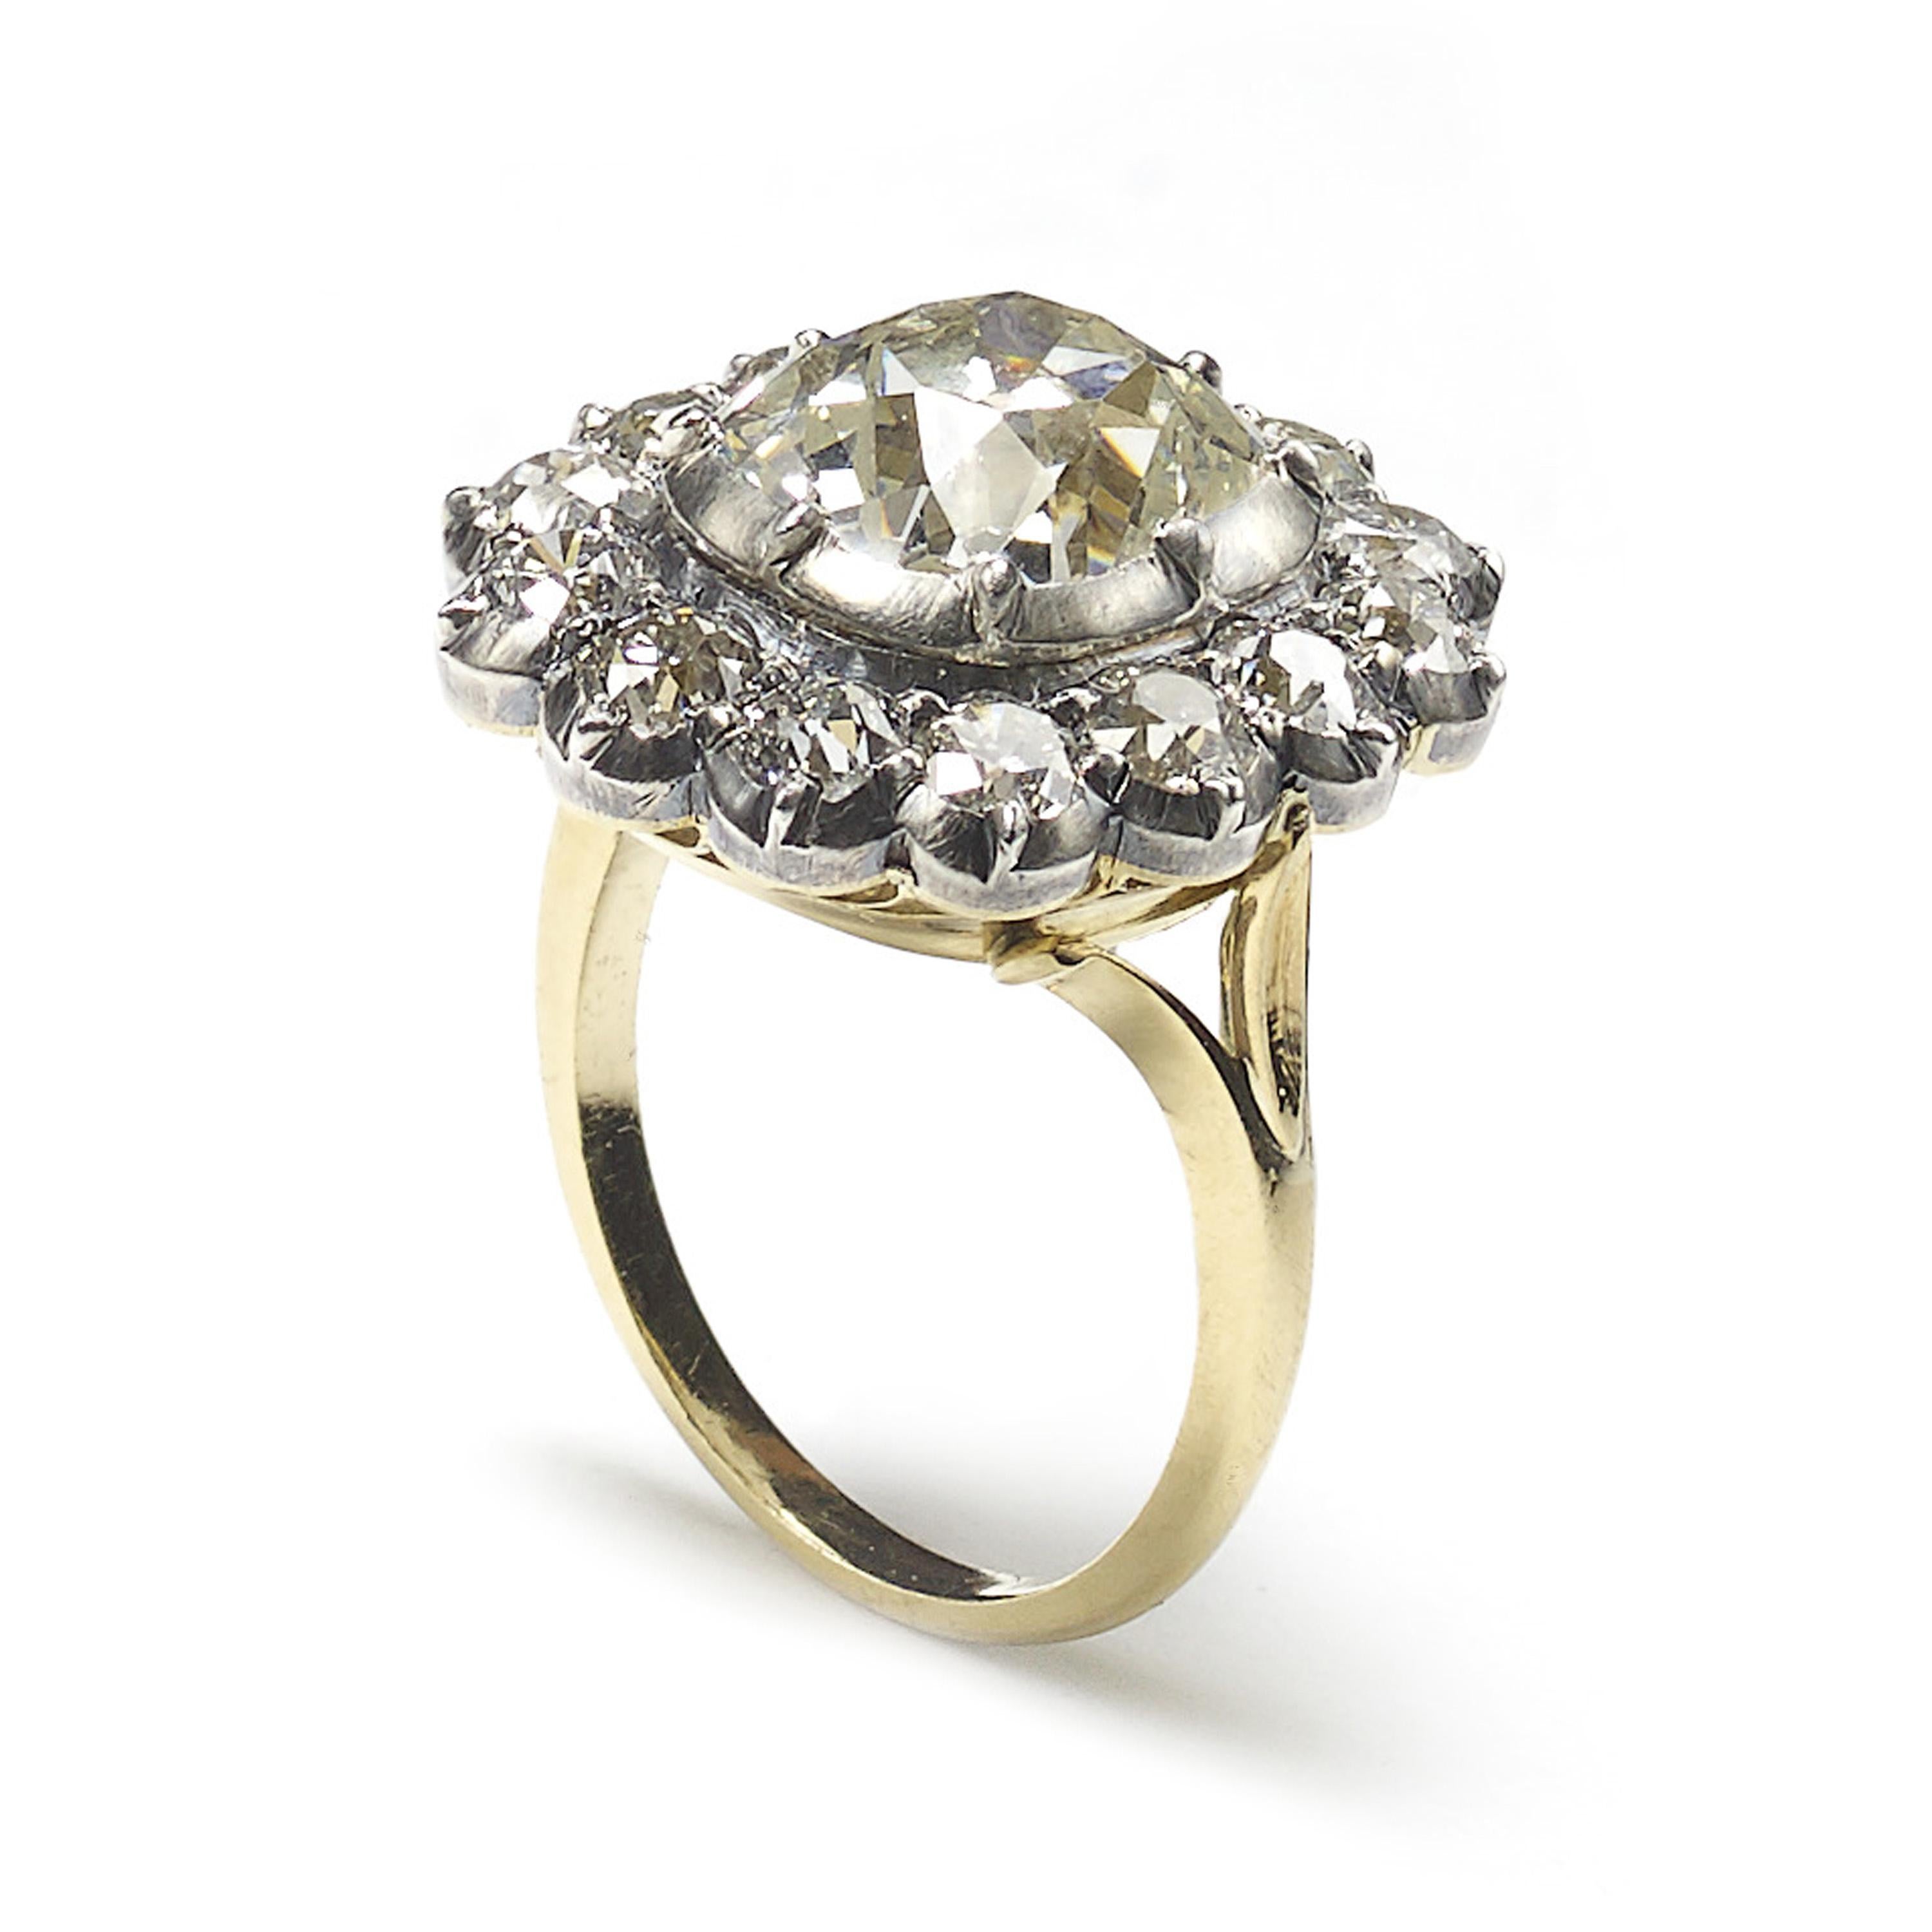 A diamond cluster ring, set with a 4.18ct, J colour, VS2 clarity, cushion shaped, old-cut diamond, surrounded by fourteen, old-cut diamonds, with an approximate total weight of 2.26ct, in cut down settings, mounted in silver-upon-gold, accompanied